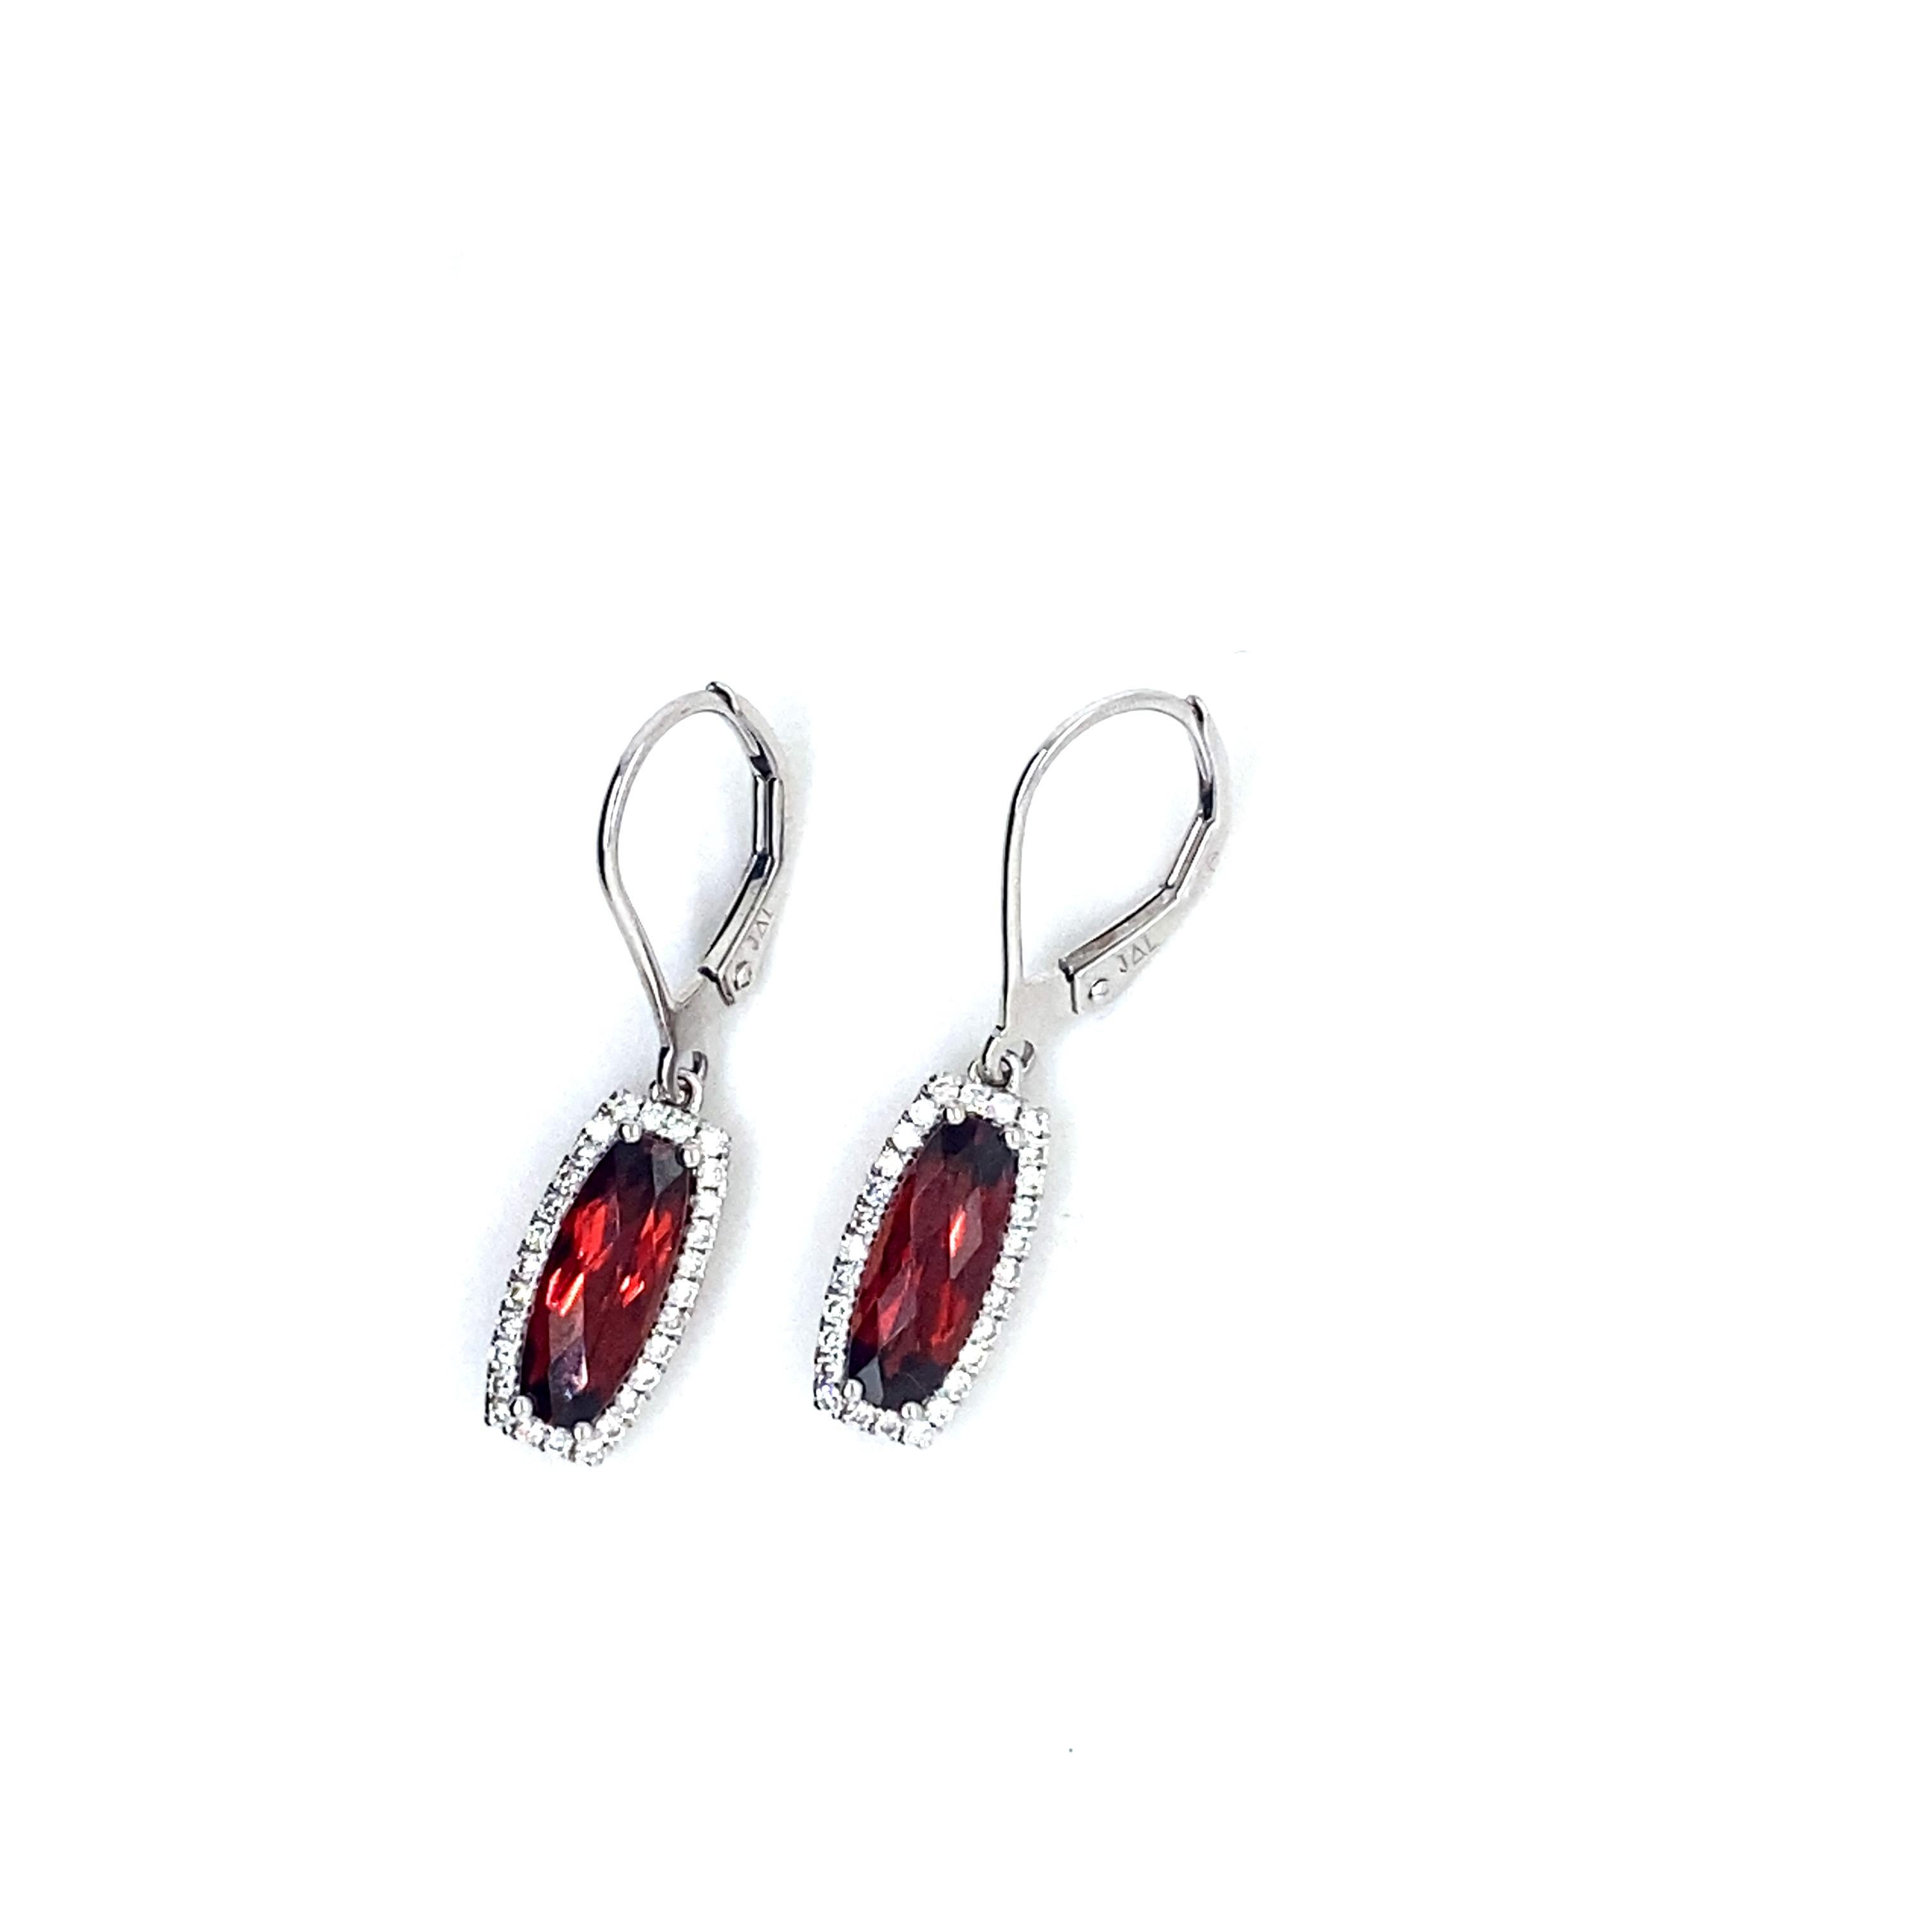 These unique dangle garnet and diamond earrings will look stunning on any earlobe! There are two checkerboard cushion cut garnets that have an elongated shape and the diamonds that are around are round brilliant cut set in very secure four prong